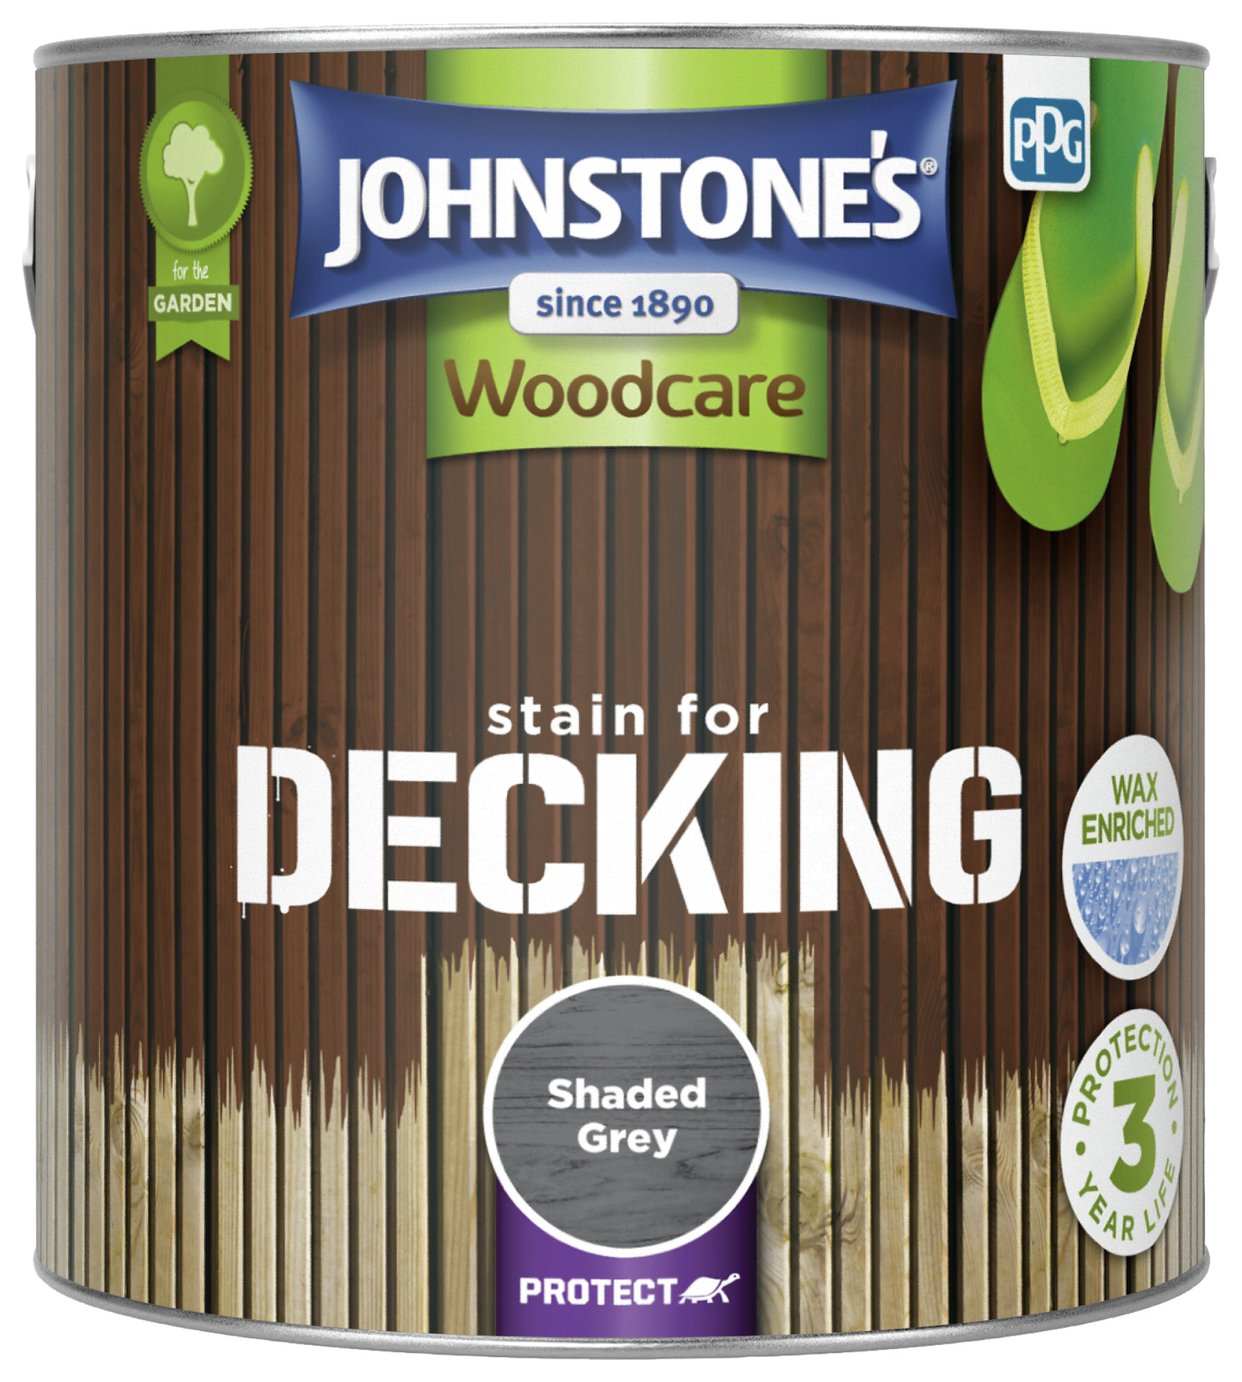 Johnstone's Woodcare Decking Stain Paint 2.5L - Shaded Grey